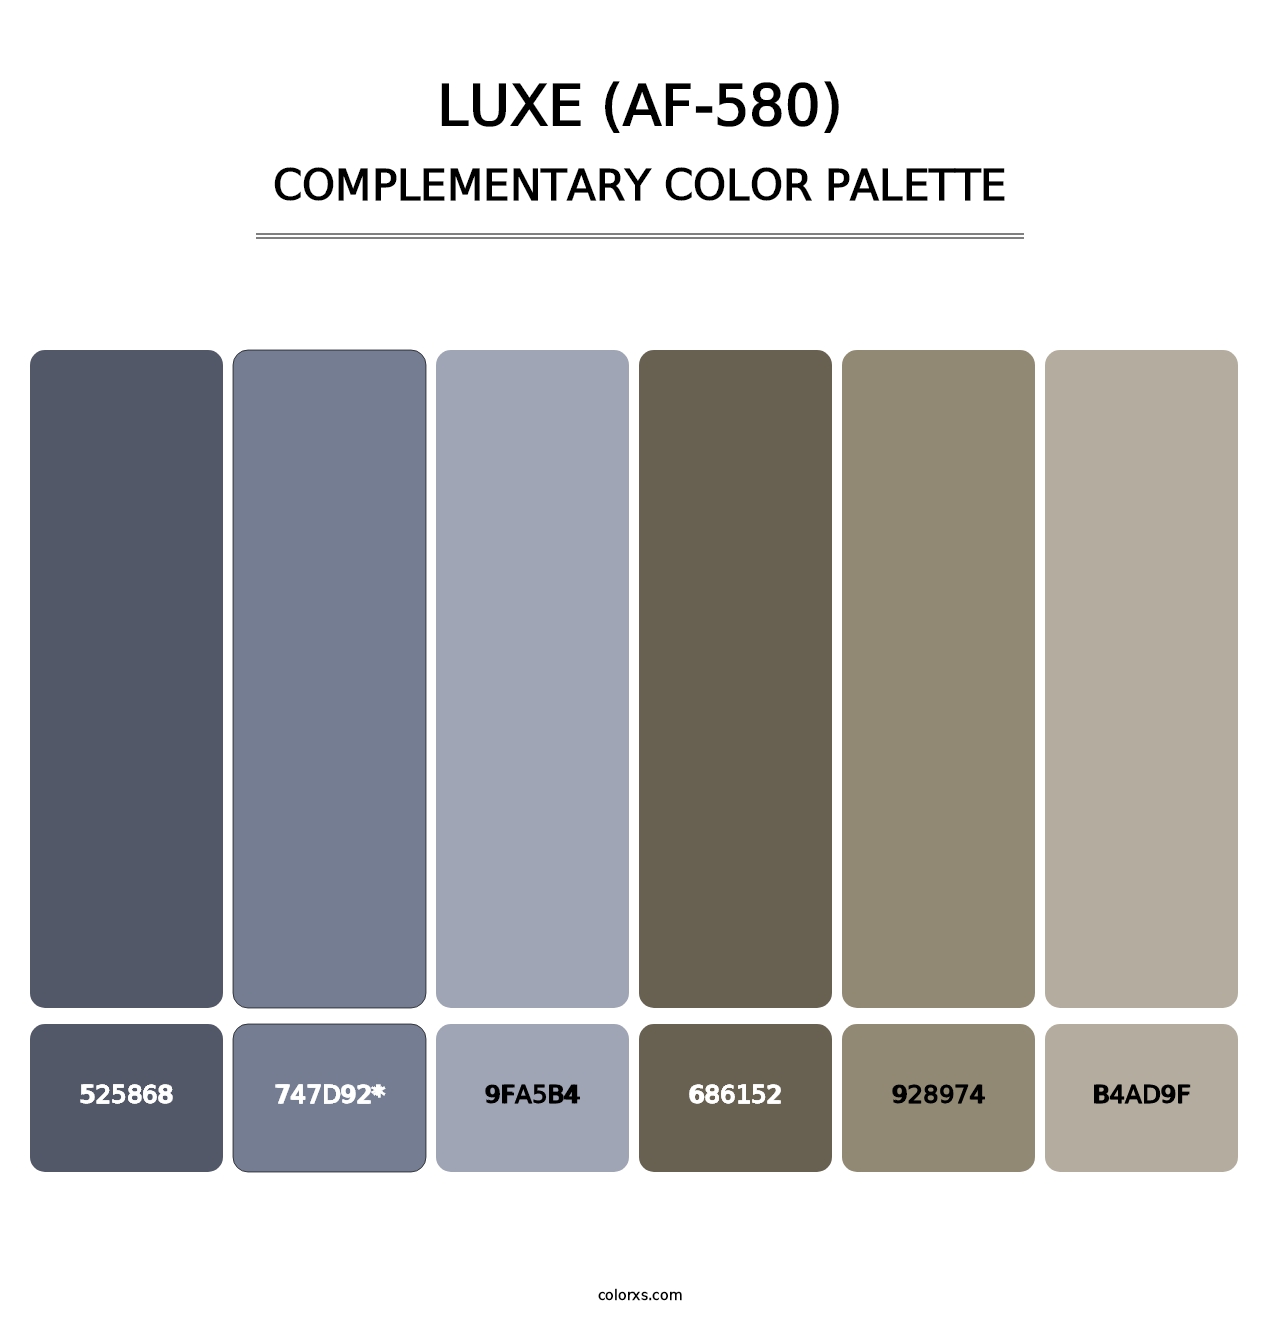 Luxe (AF-580) - Complementary Color Palette